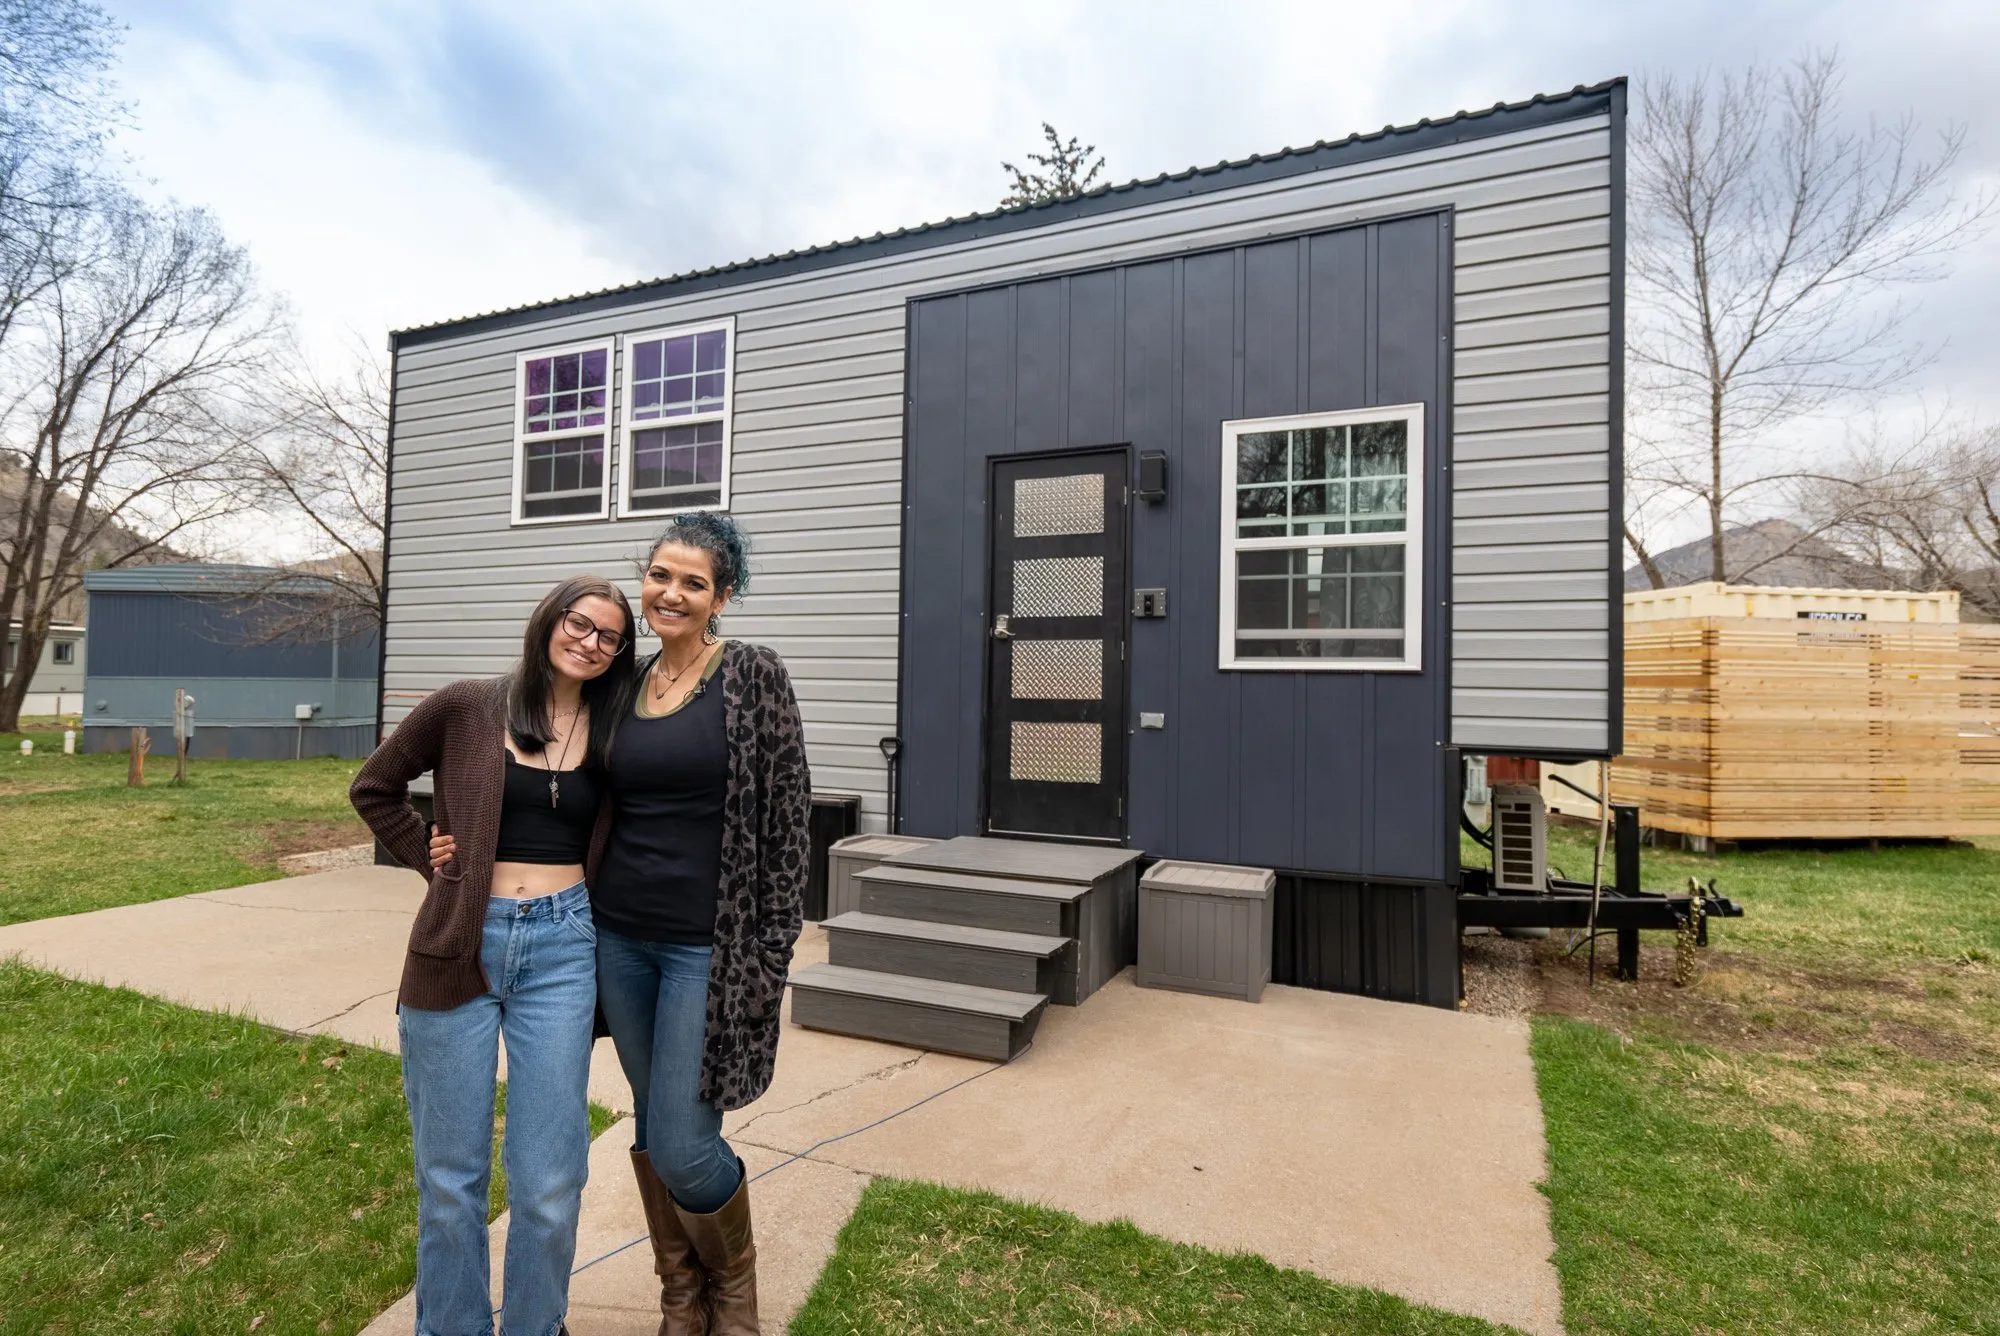 The Tiny Living Course: Types of Tiny Homes & Their Costs